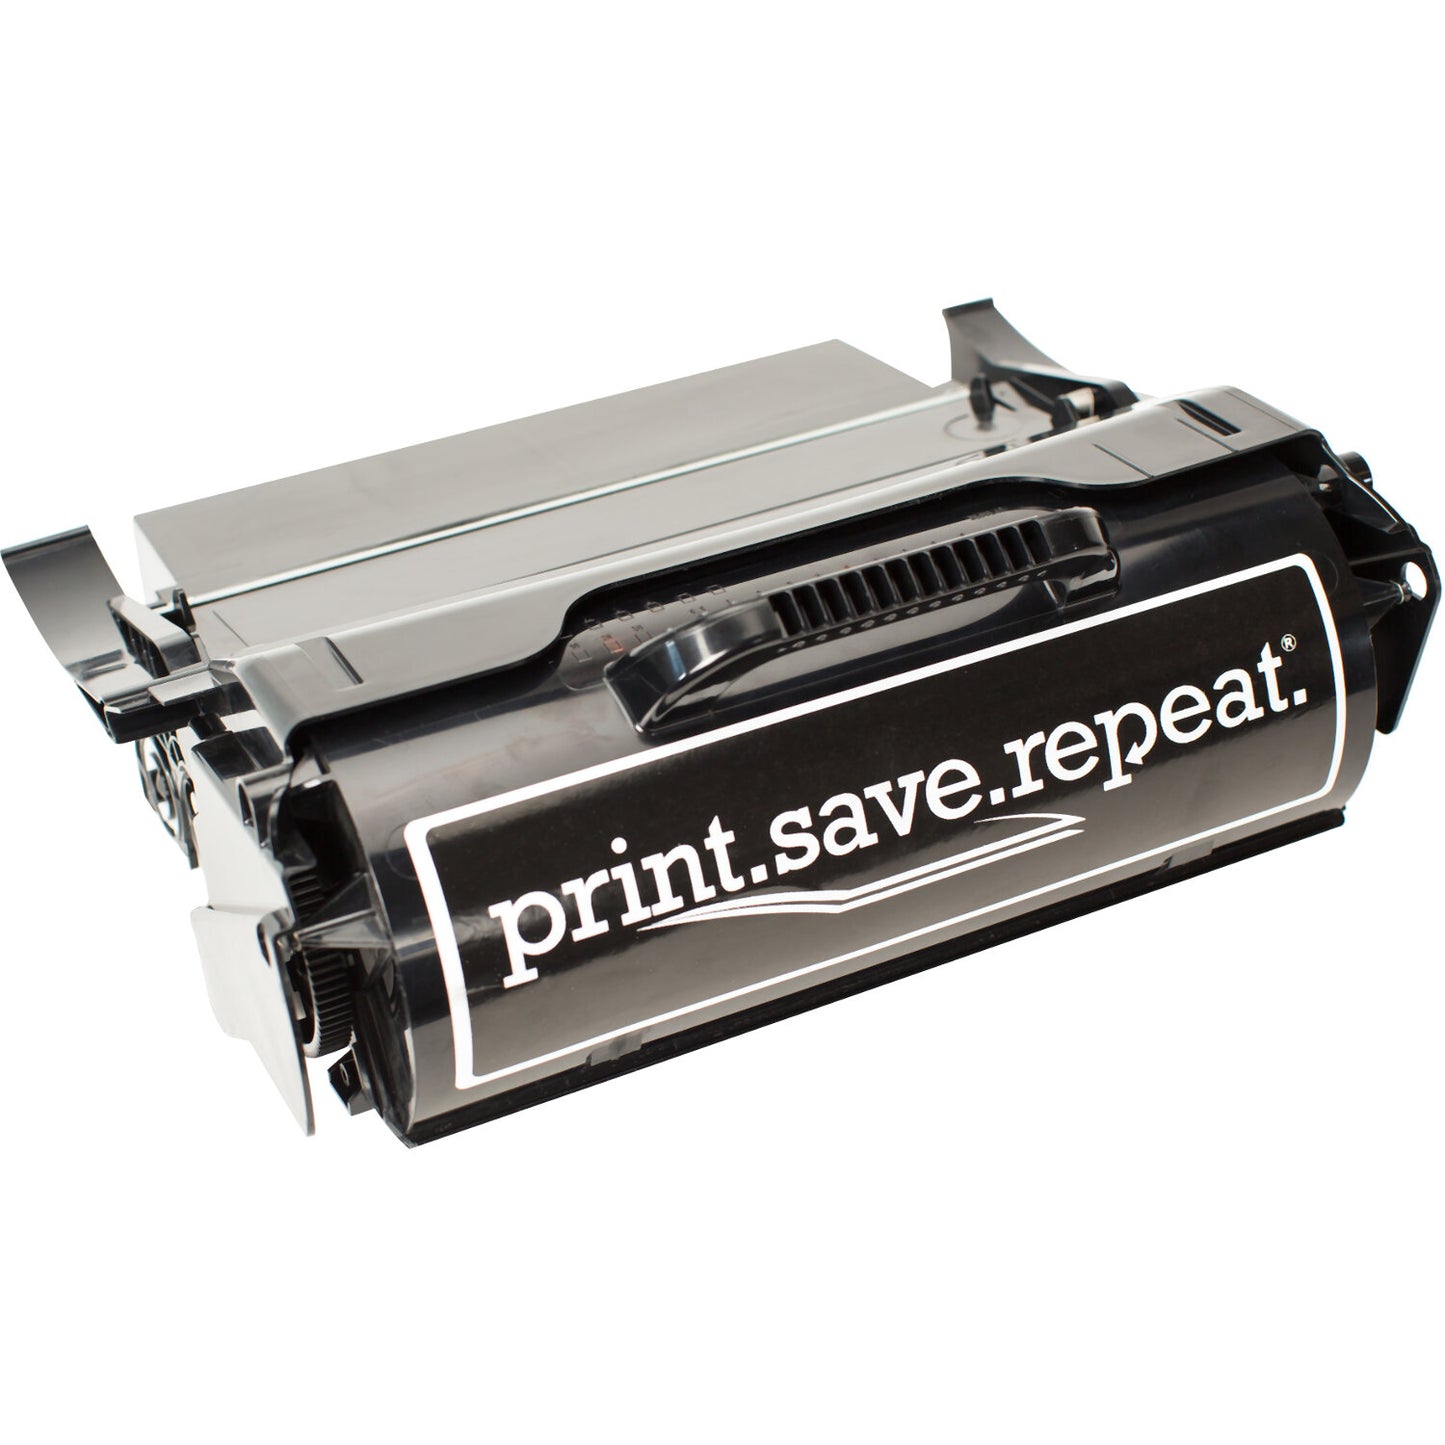 Print.Save.Repeat. Dell F362T High Yield Remanufactured Toner Cartridge for 5230, 5350 [21,000 Pages]